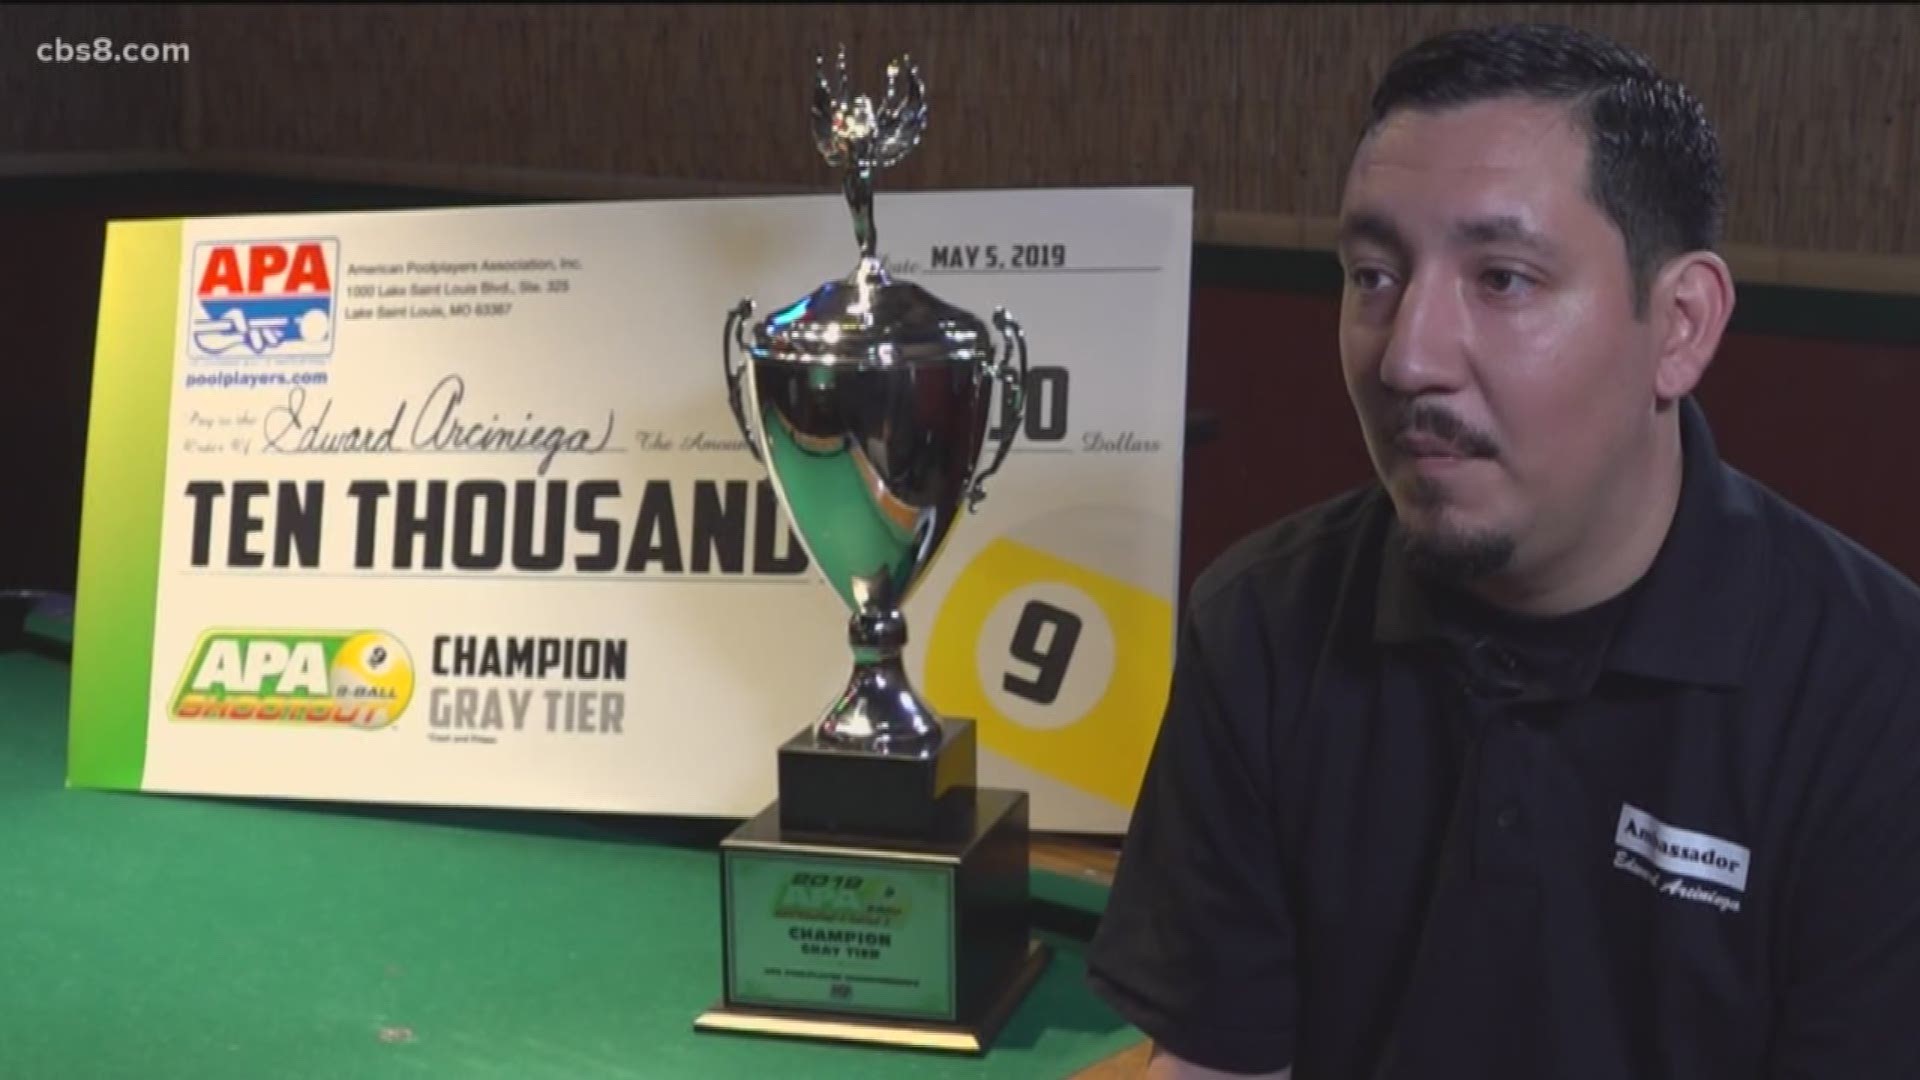 San Diego has another National Billiards champ to brag about. Edward Arciniega of National City who recently returned from Las Vegas where he was one of just 138 amateur players in the nation's biggest 9-ball tournament. News 8 Jake Garegnani has more on the story.